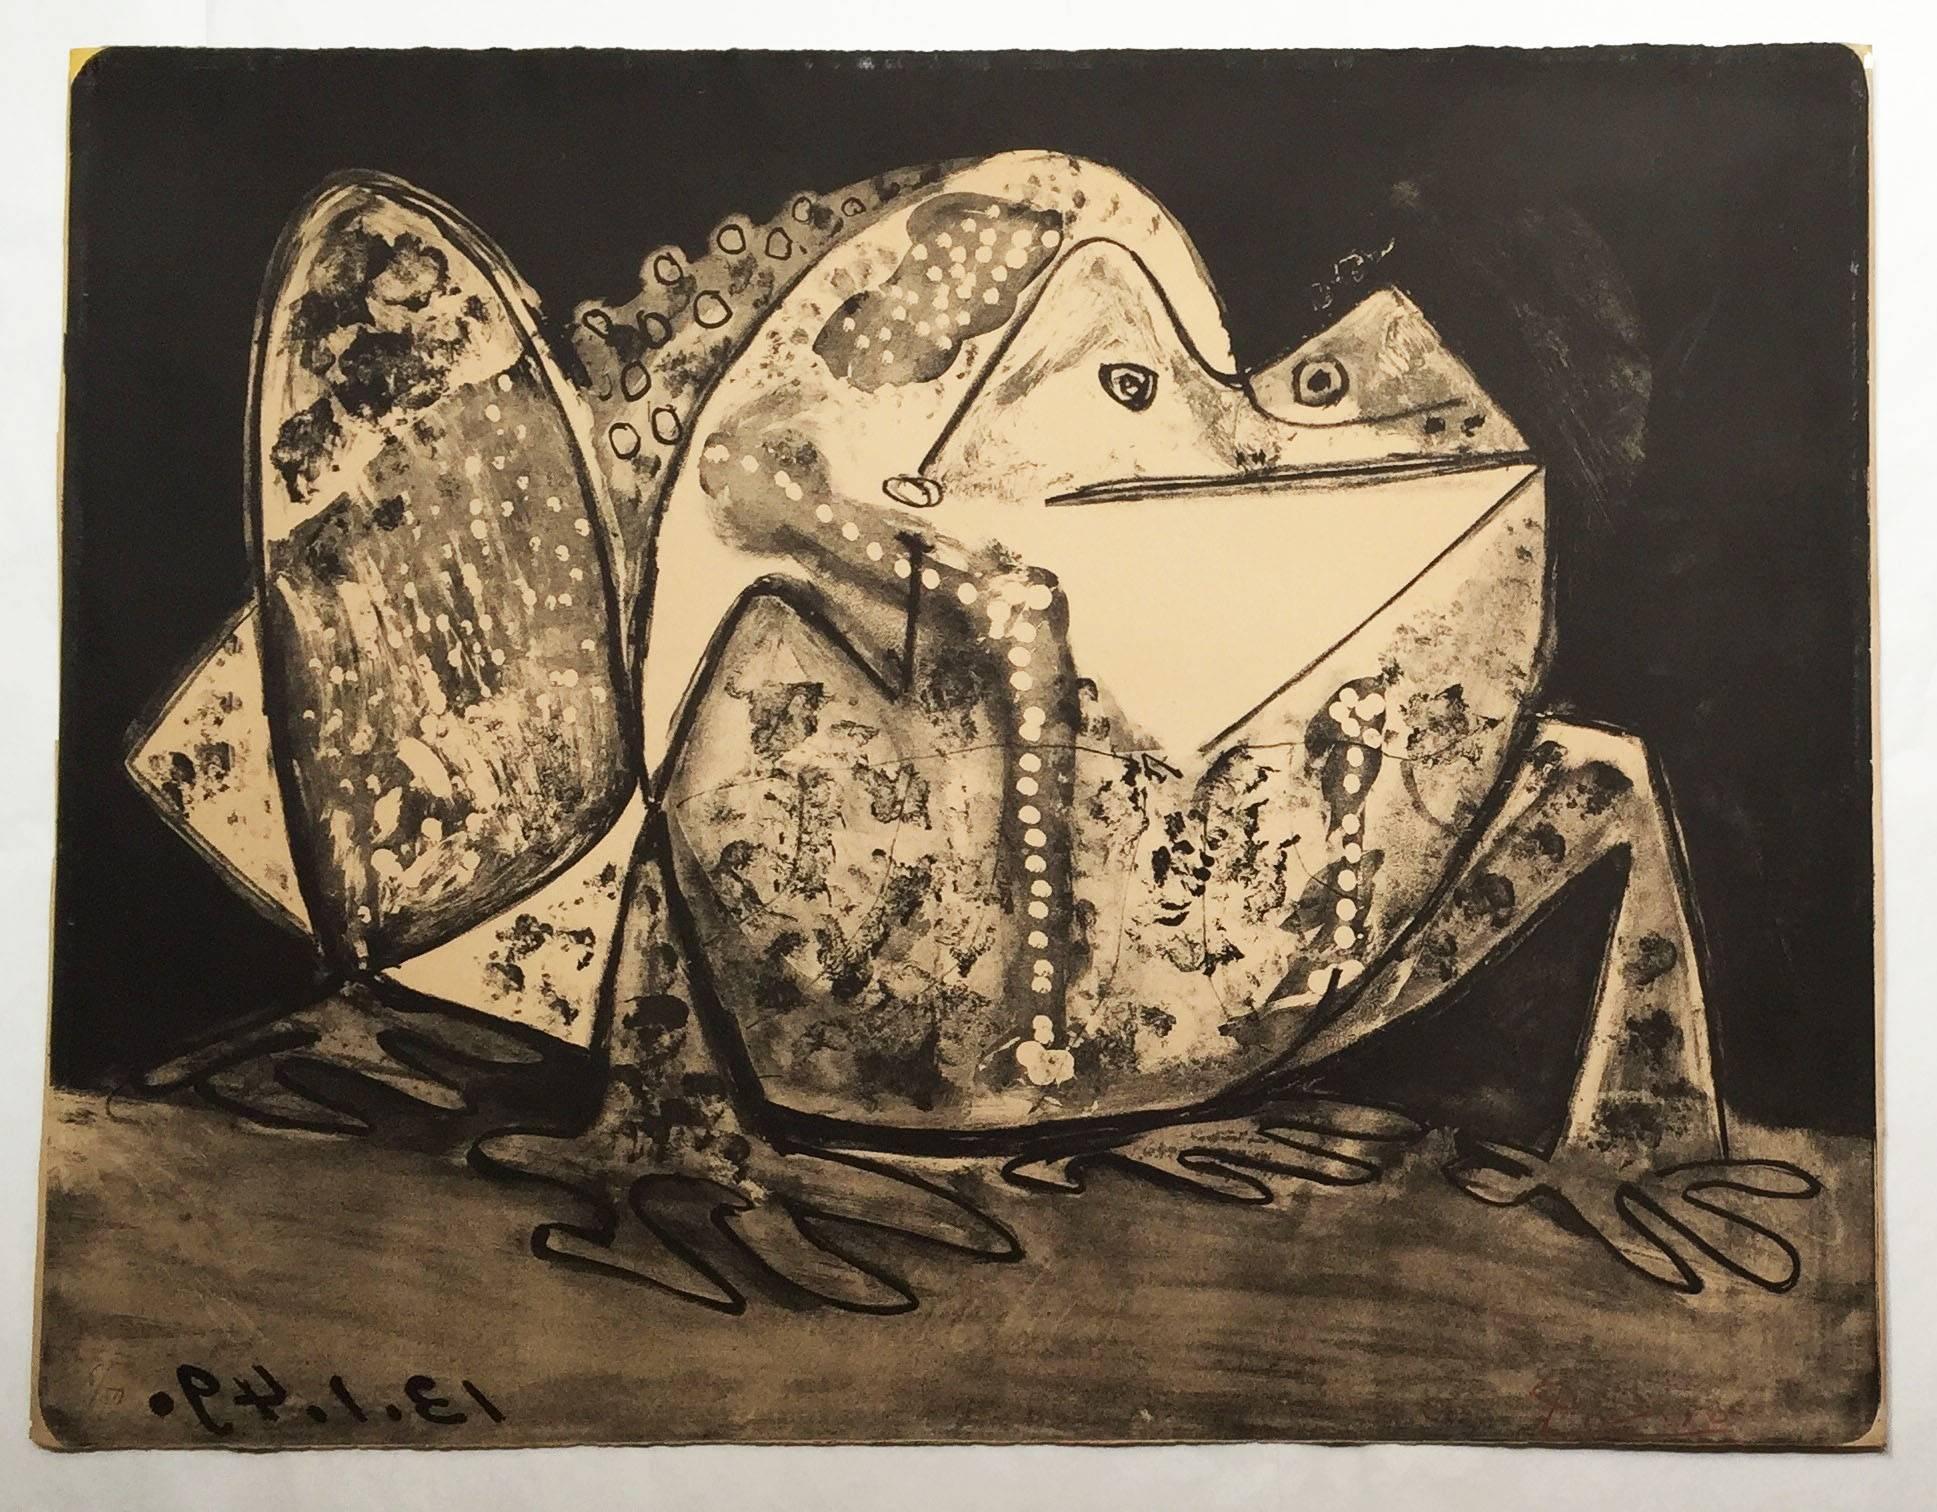 picasso limited edition lithograph